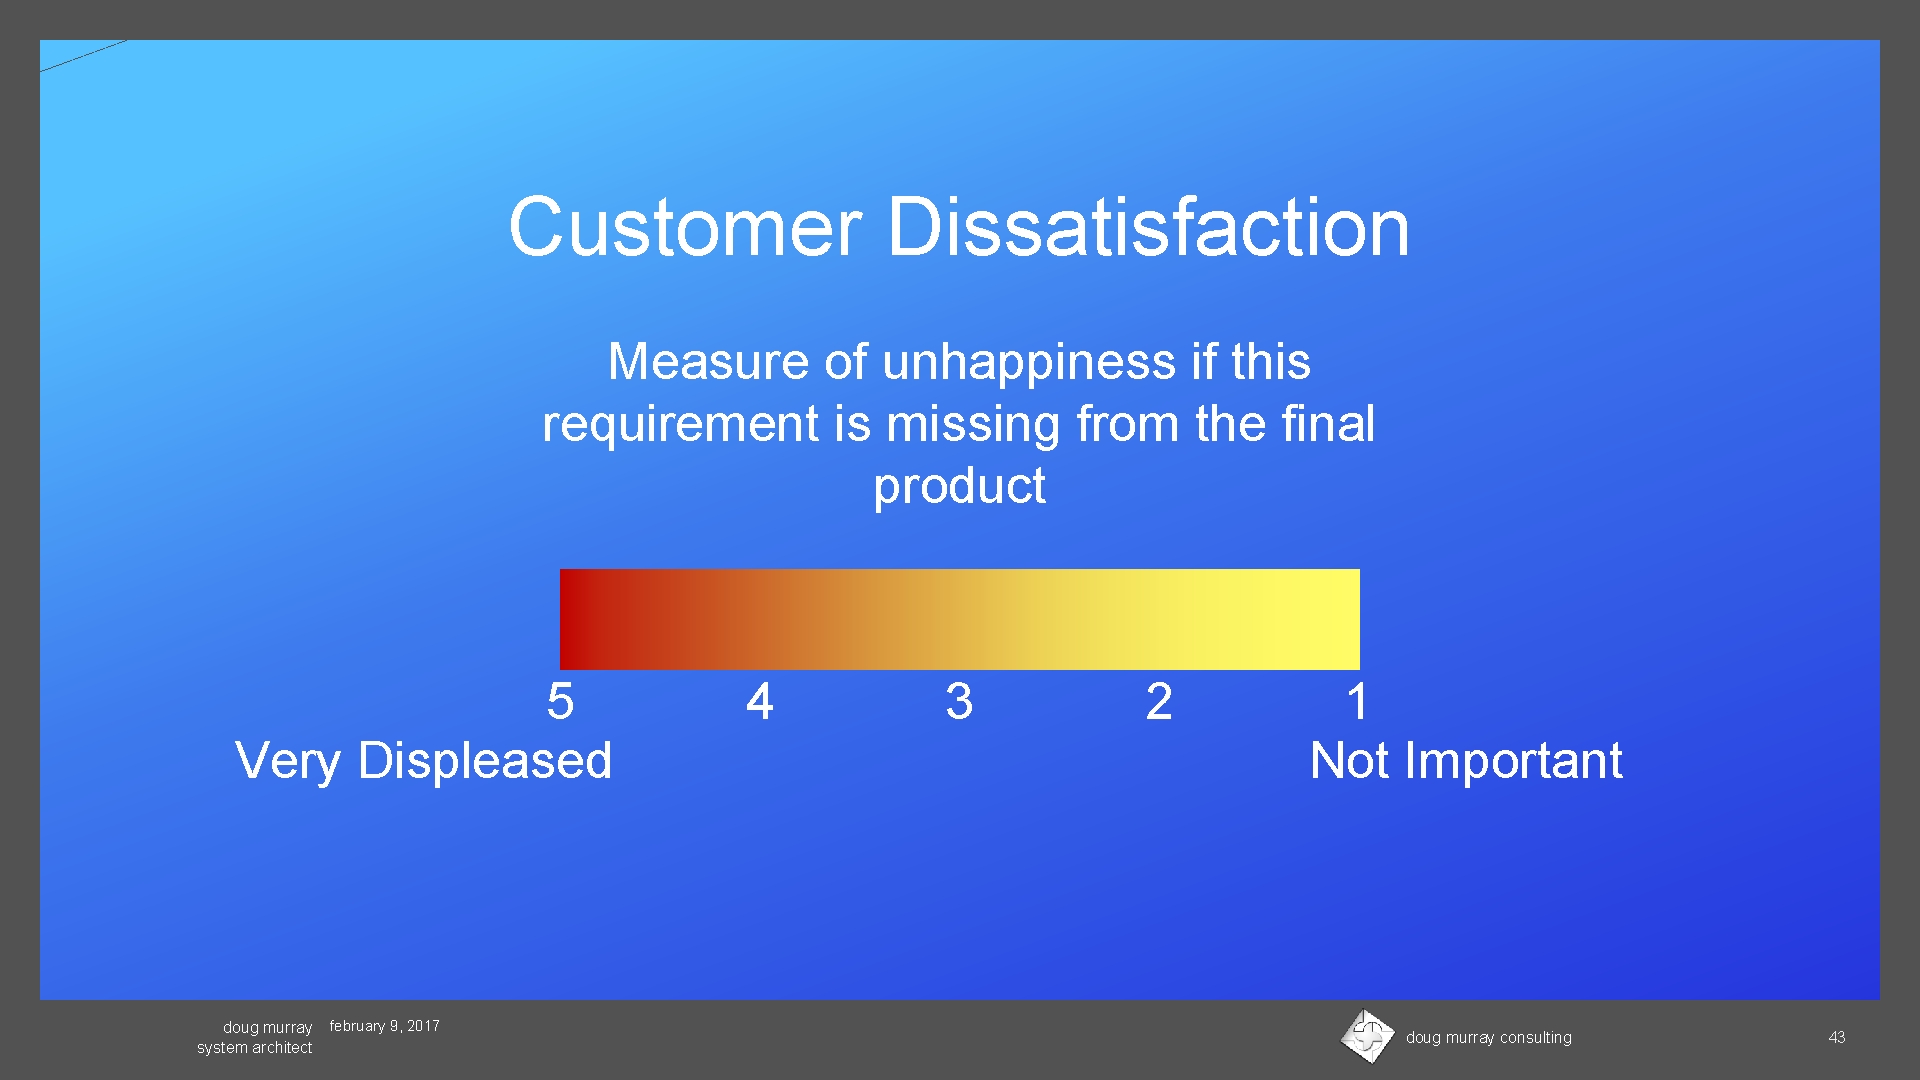 Customer Dissatisfaction Measure of unhappiness if this requirement is missing from the final product